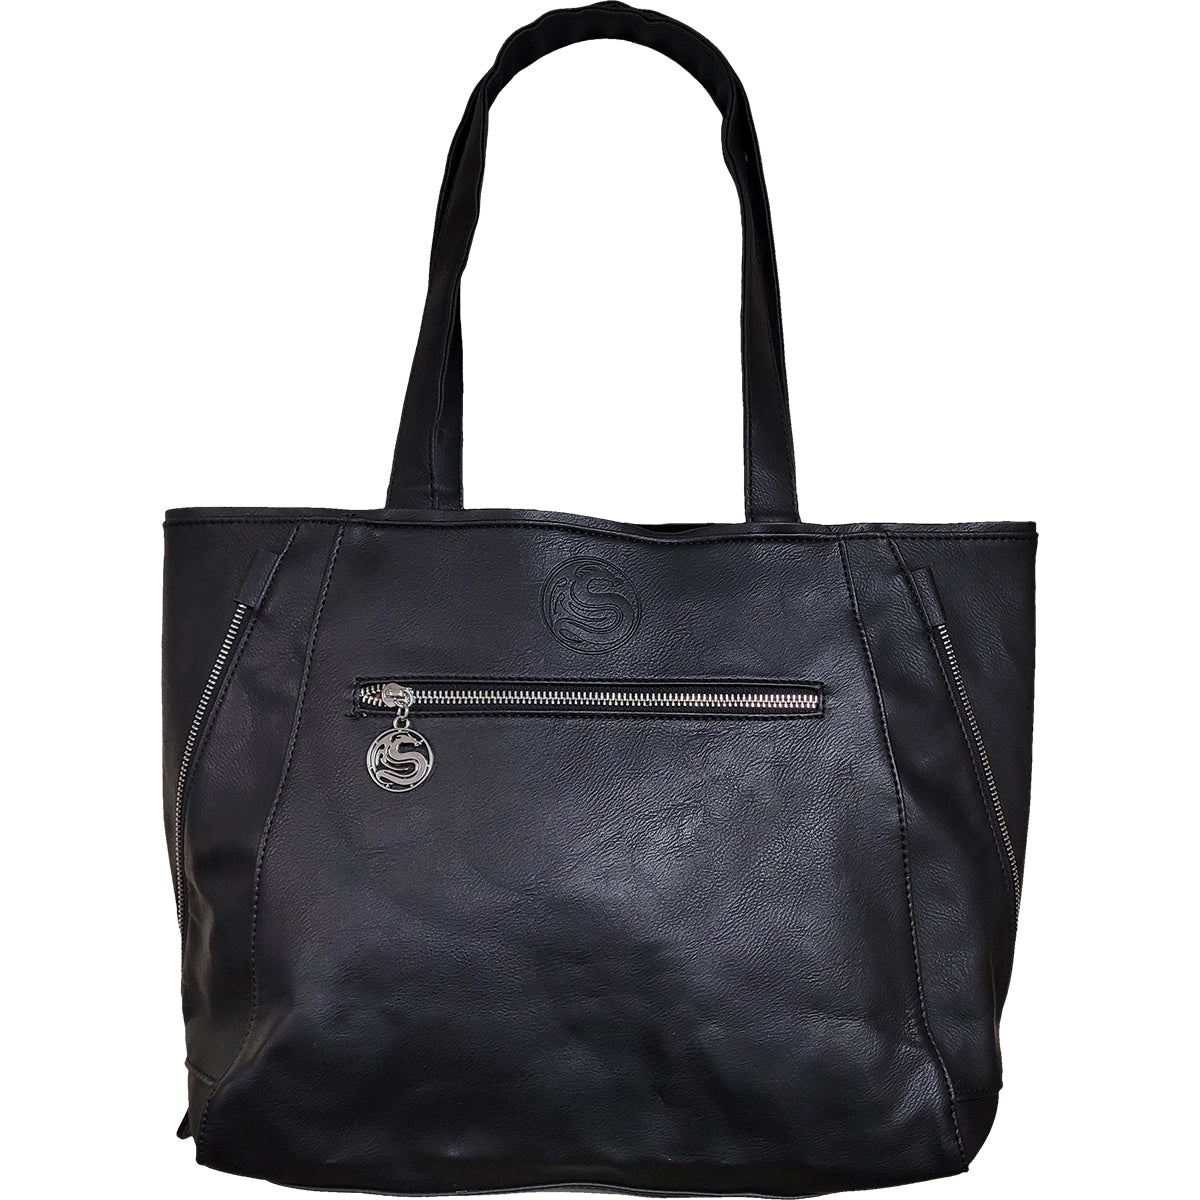 CELTIC WOLF - Tote Bag - Top quality PU Leather Studded